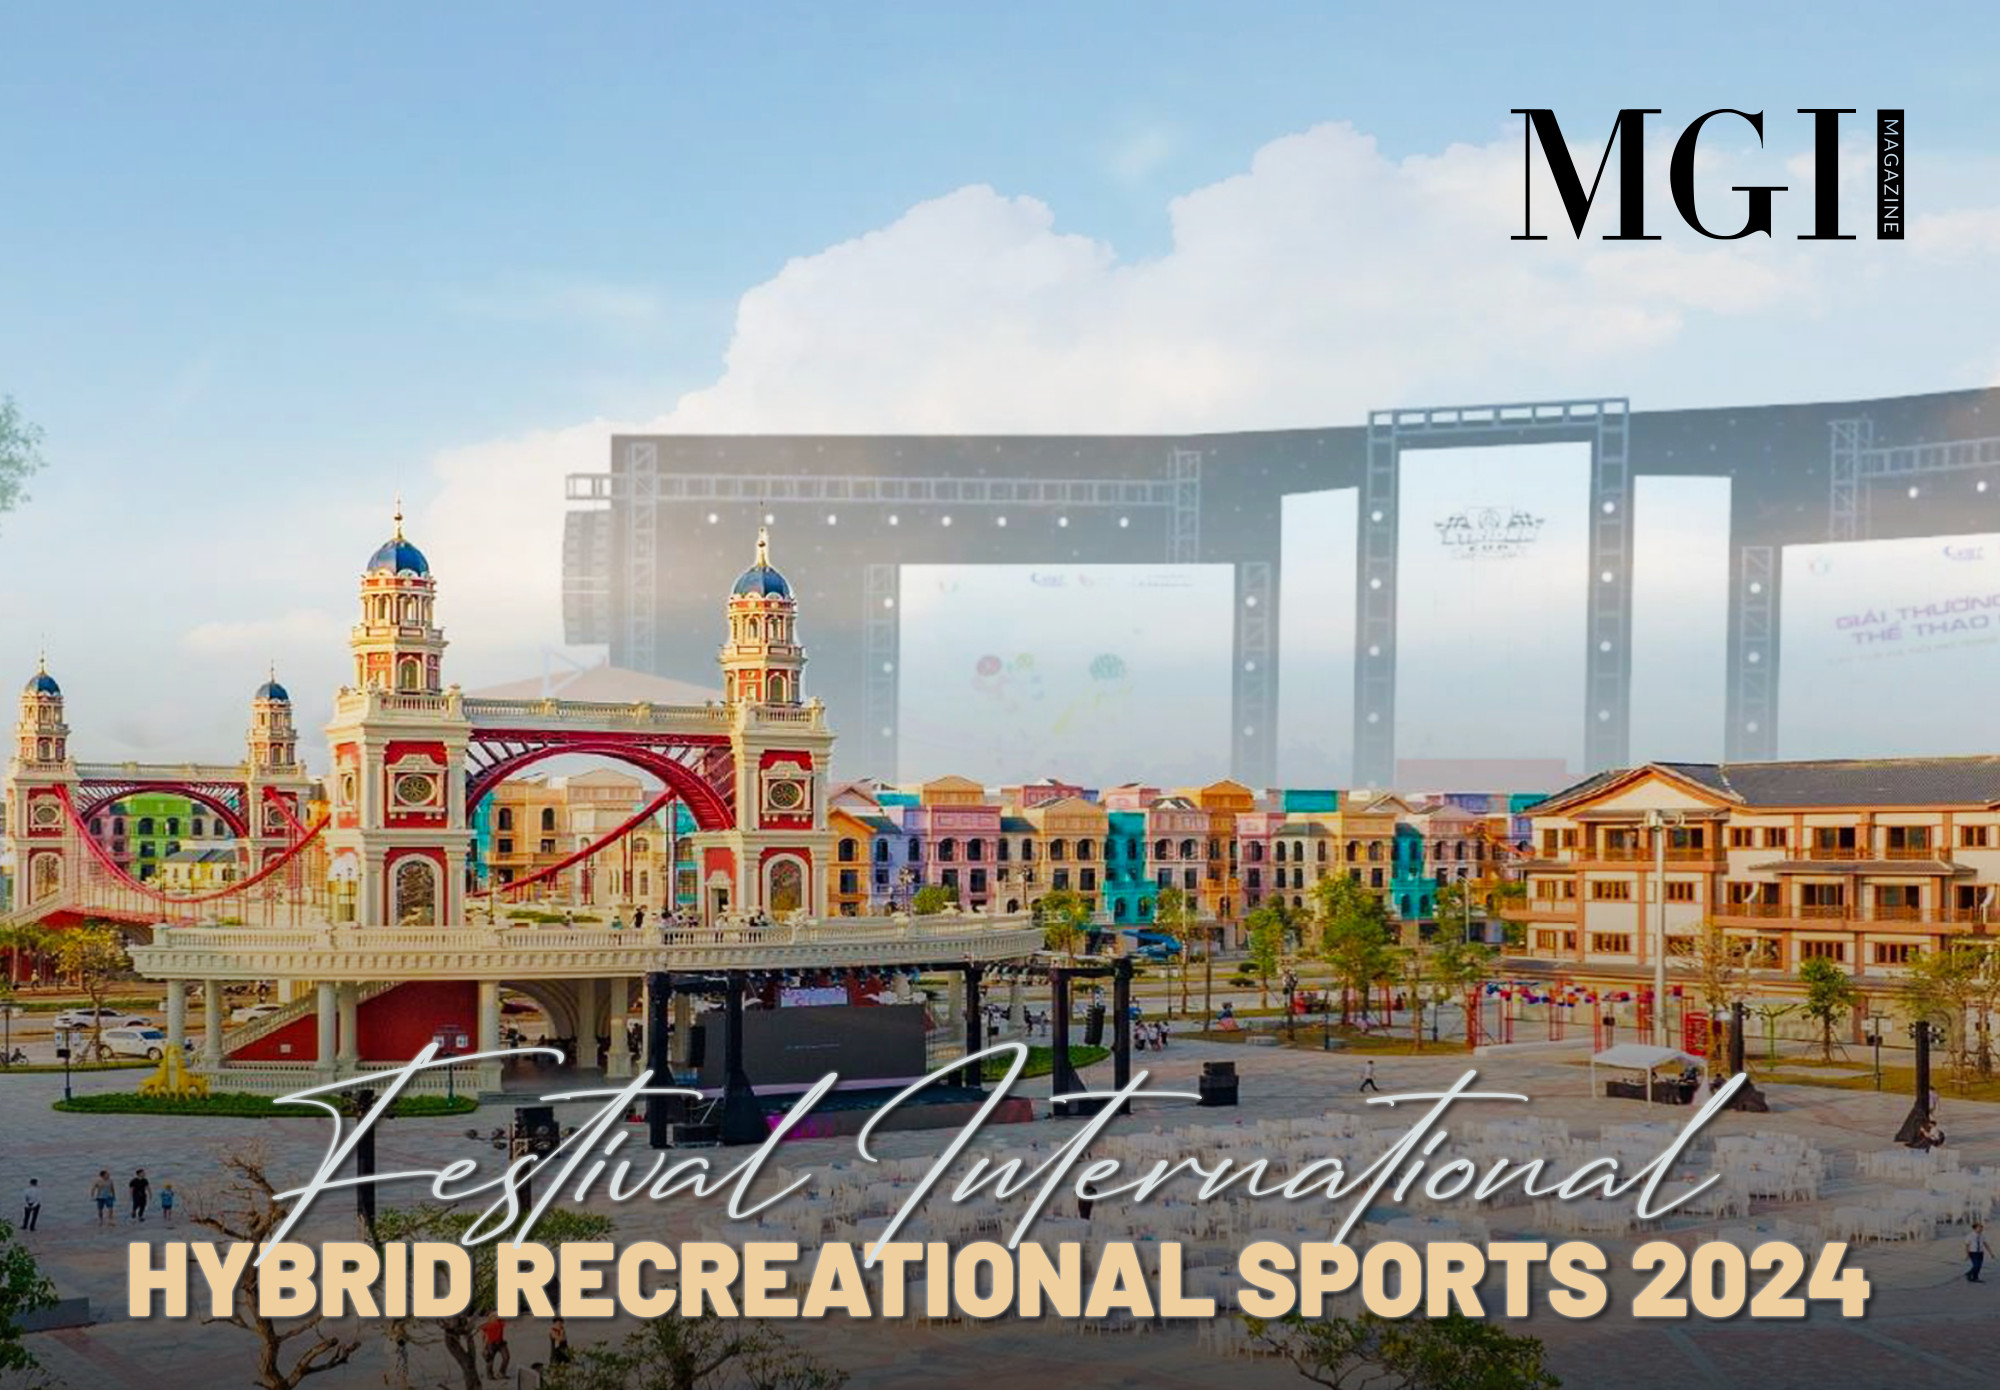 Festival International Hybrid Recreational Sports 2024 – Elevating your experience with special sports